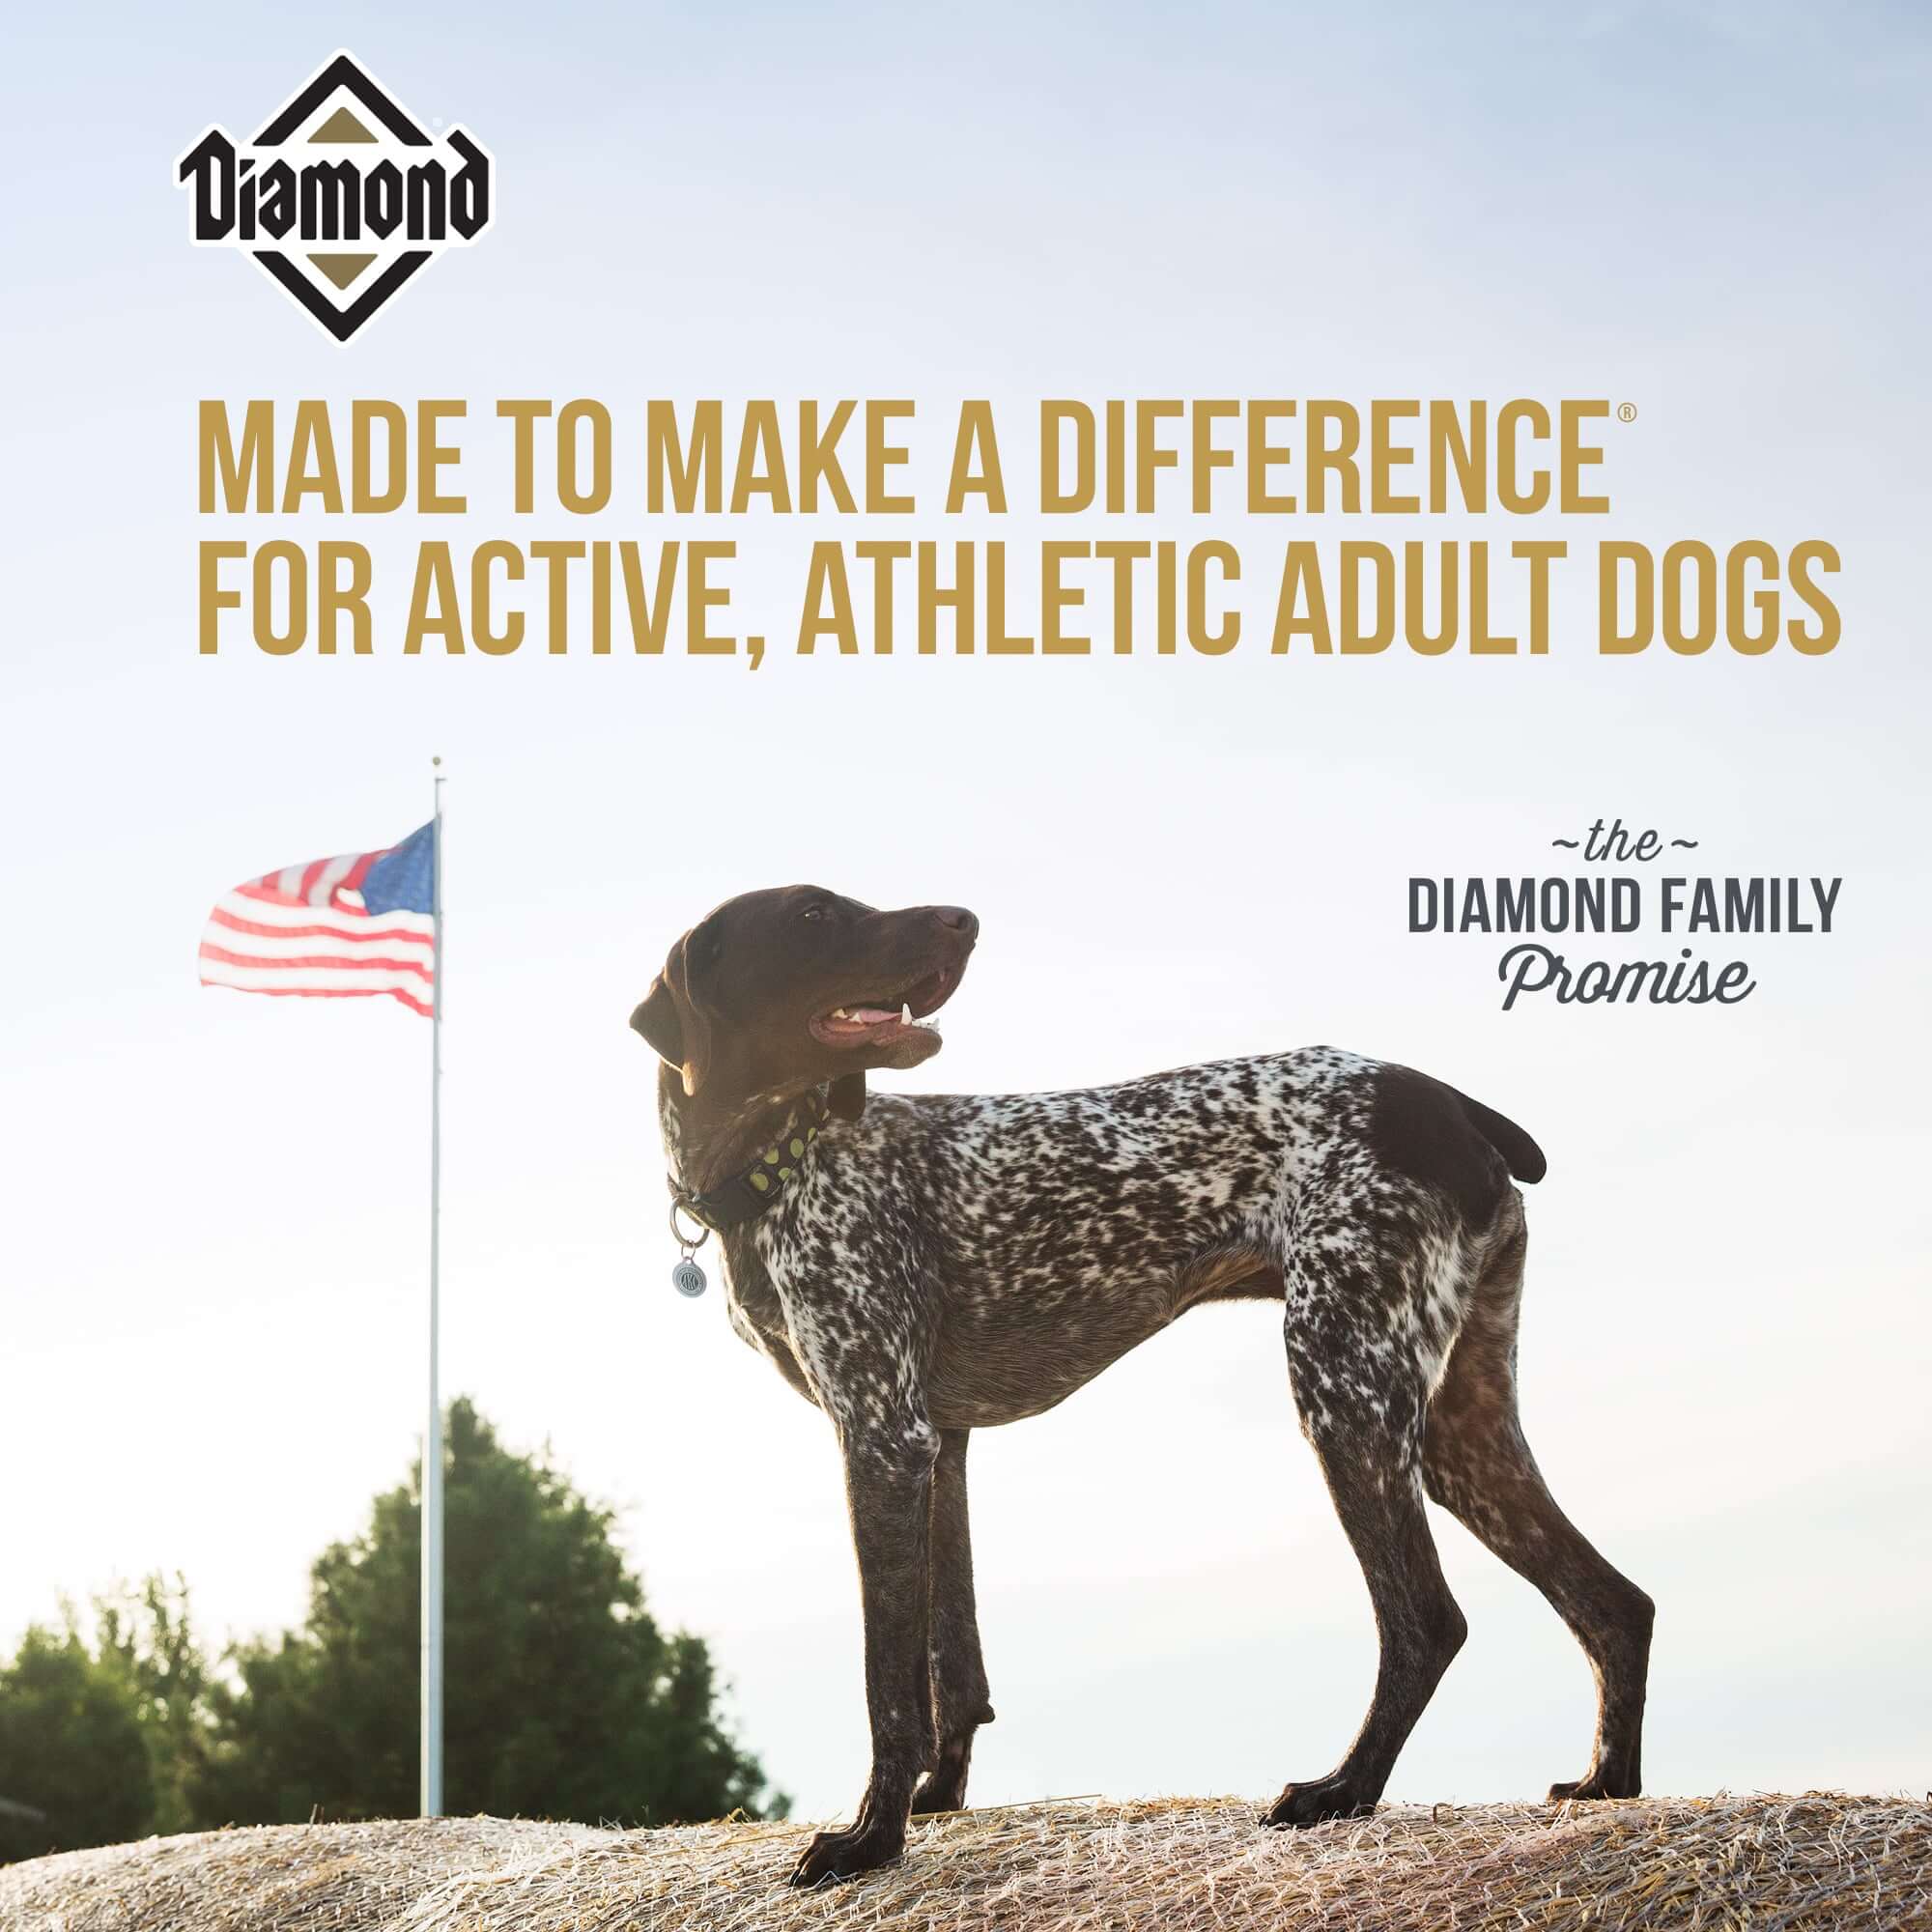 Made to make a difference for active, athletic adult dogs